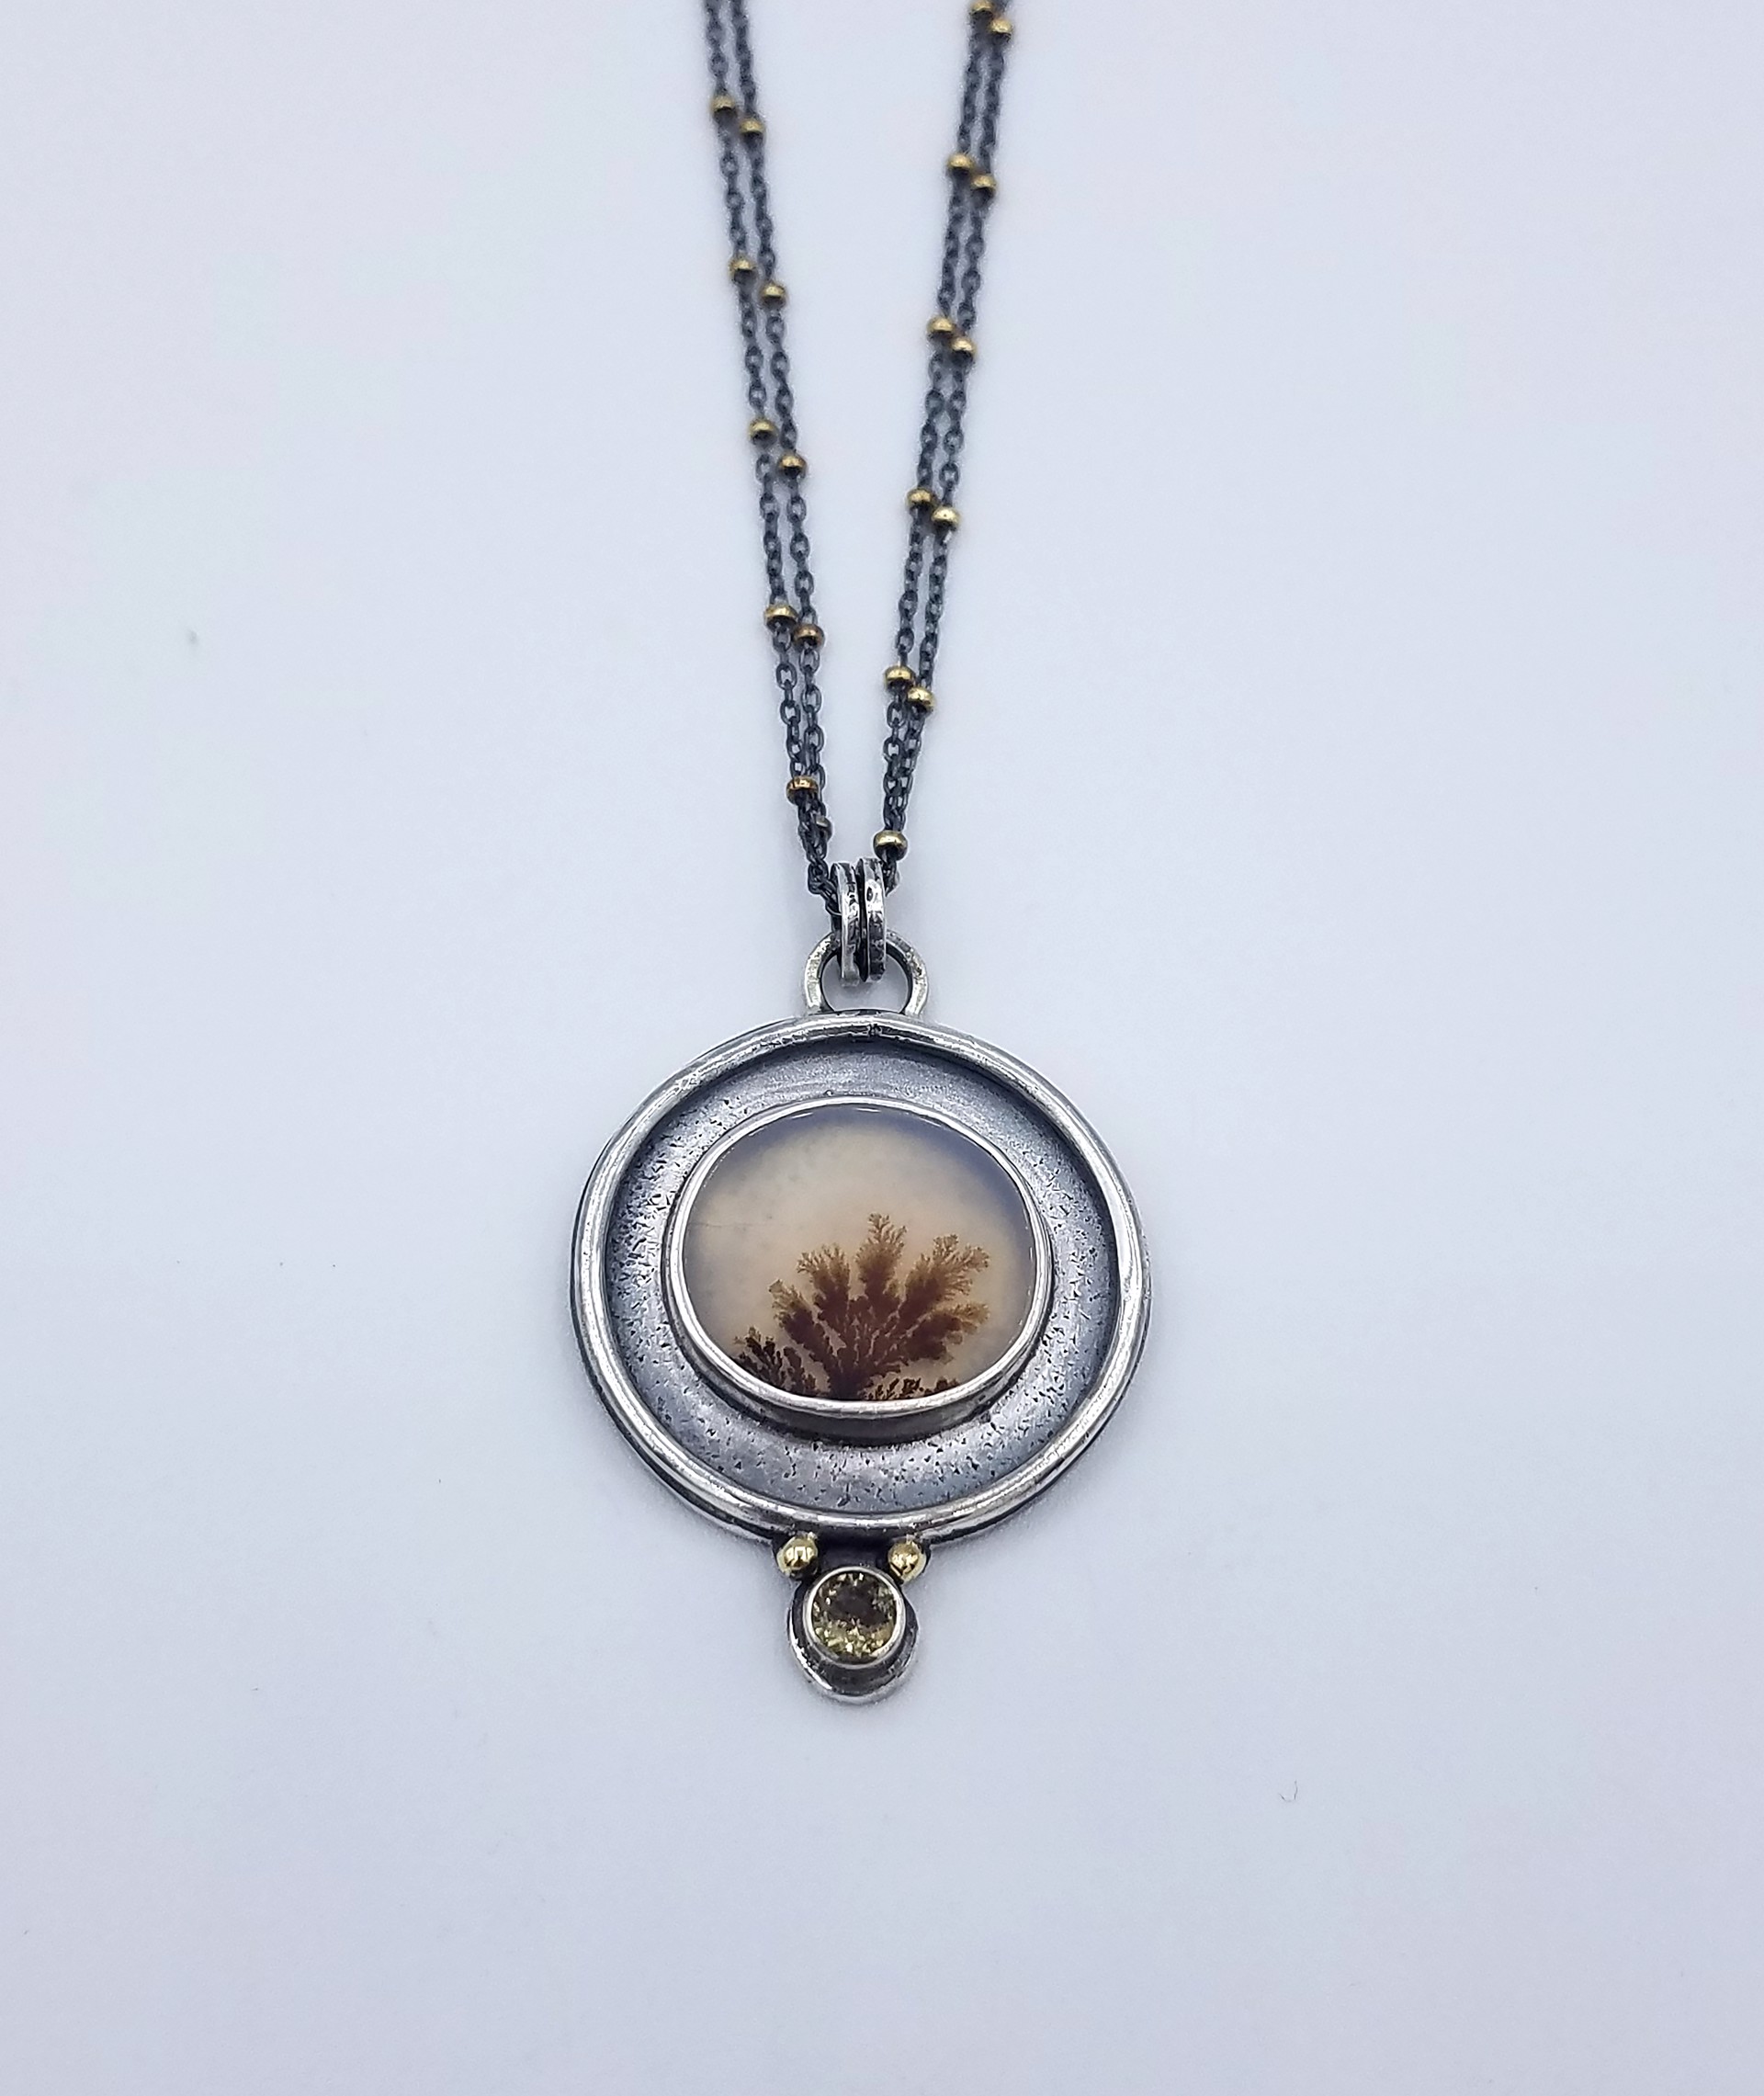 Dendritic Agate & Tourmaline Necklace by Anita Shuler